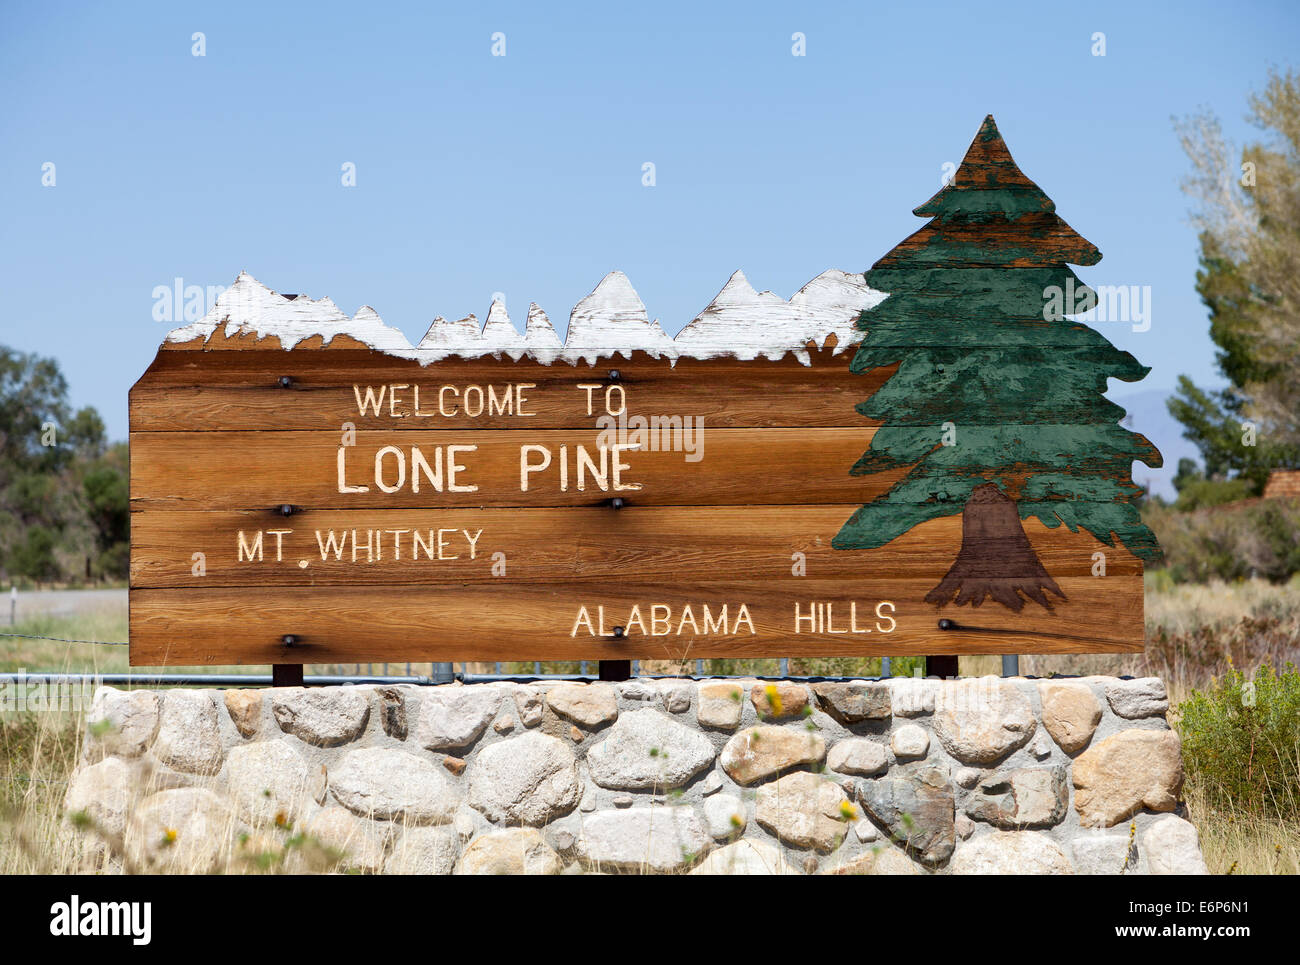 Welcome to Lone Pine, Mt. Whitney and Alabama Hills sign. Stock Photo